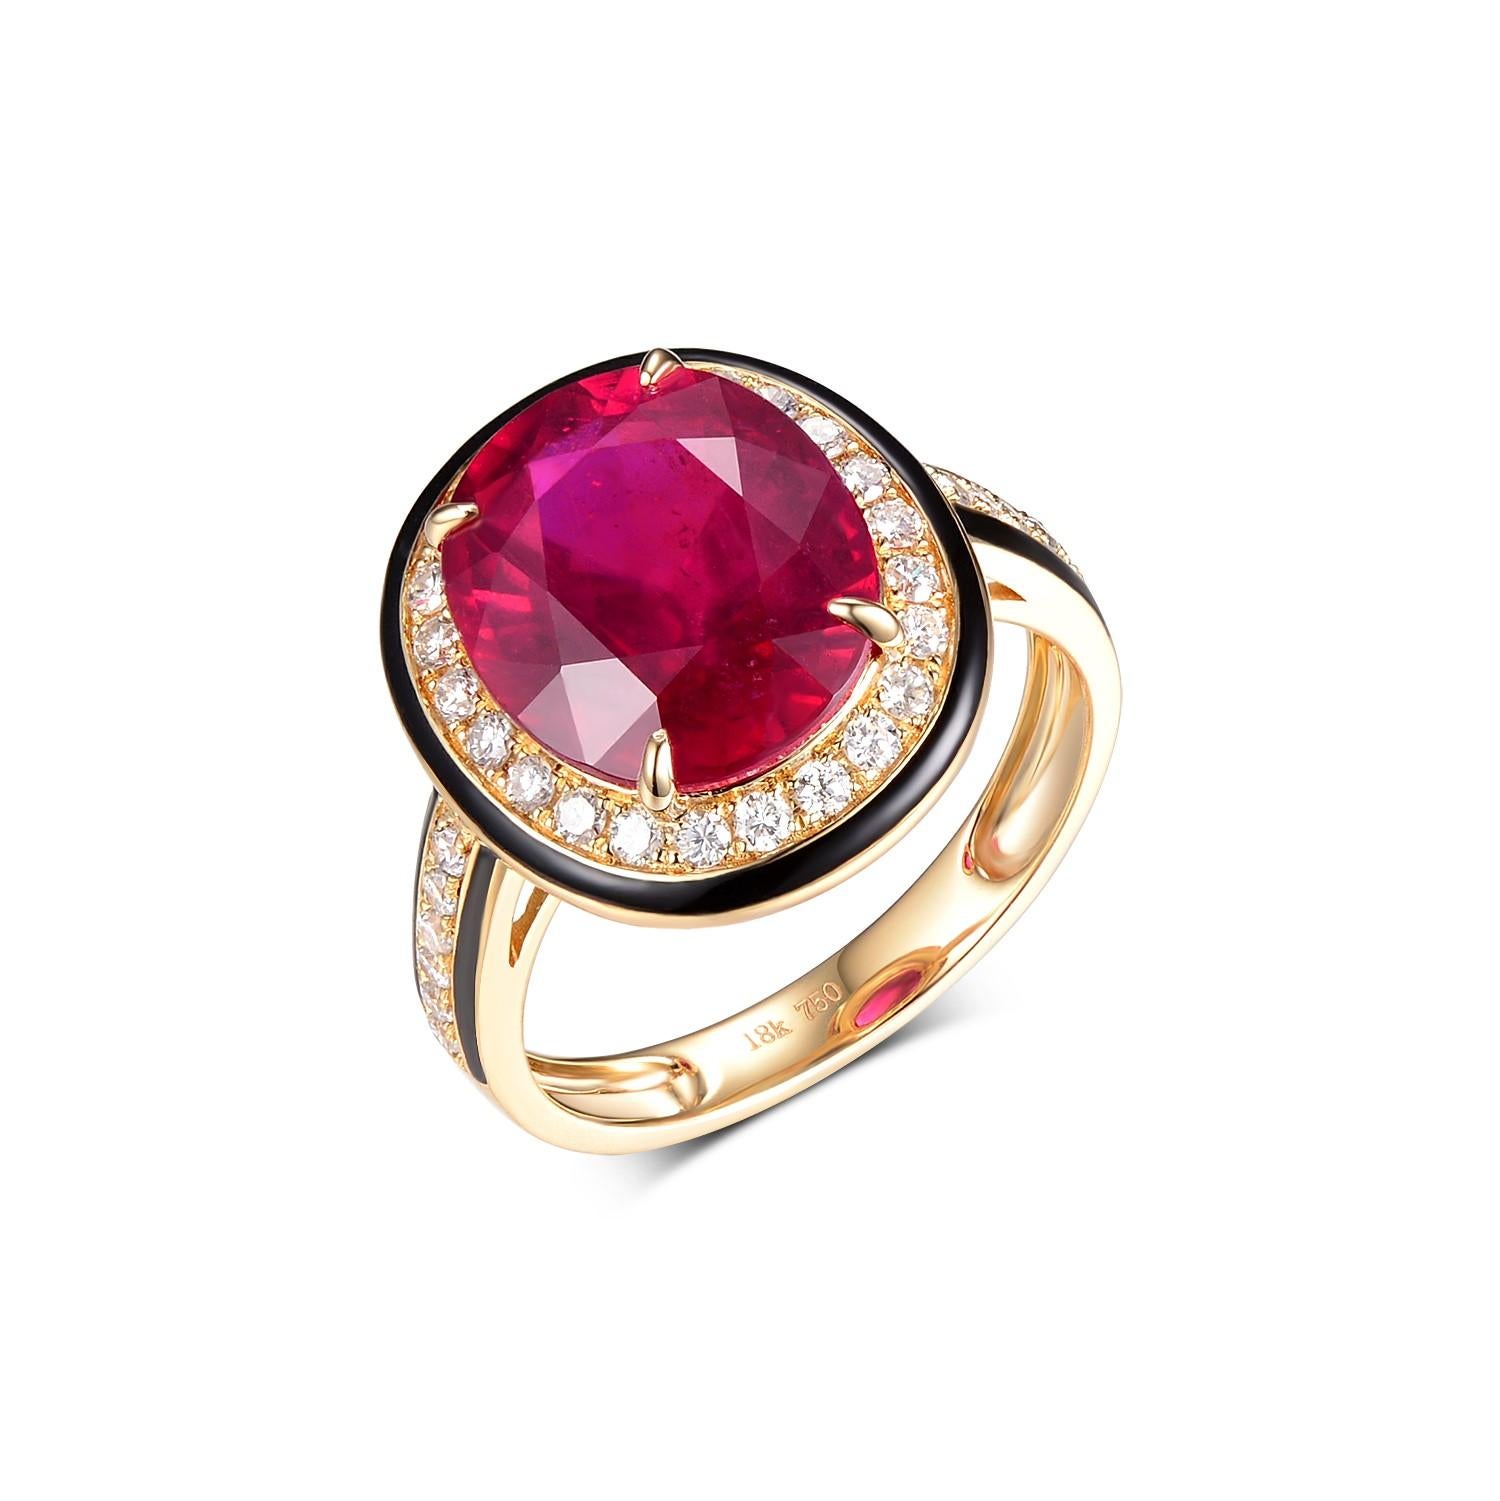 This ring is a bold statement of luxury and color, featuring a stunning 6.58-carat glass-filled ruby as its centerpiece. The ruby, measuring 12x10mm, boasts a rich, deep crimson color that commands attention. The process of glass filling enhances